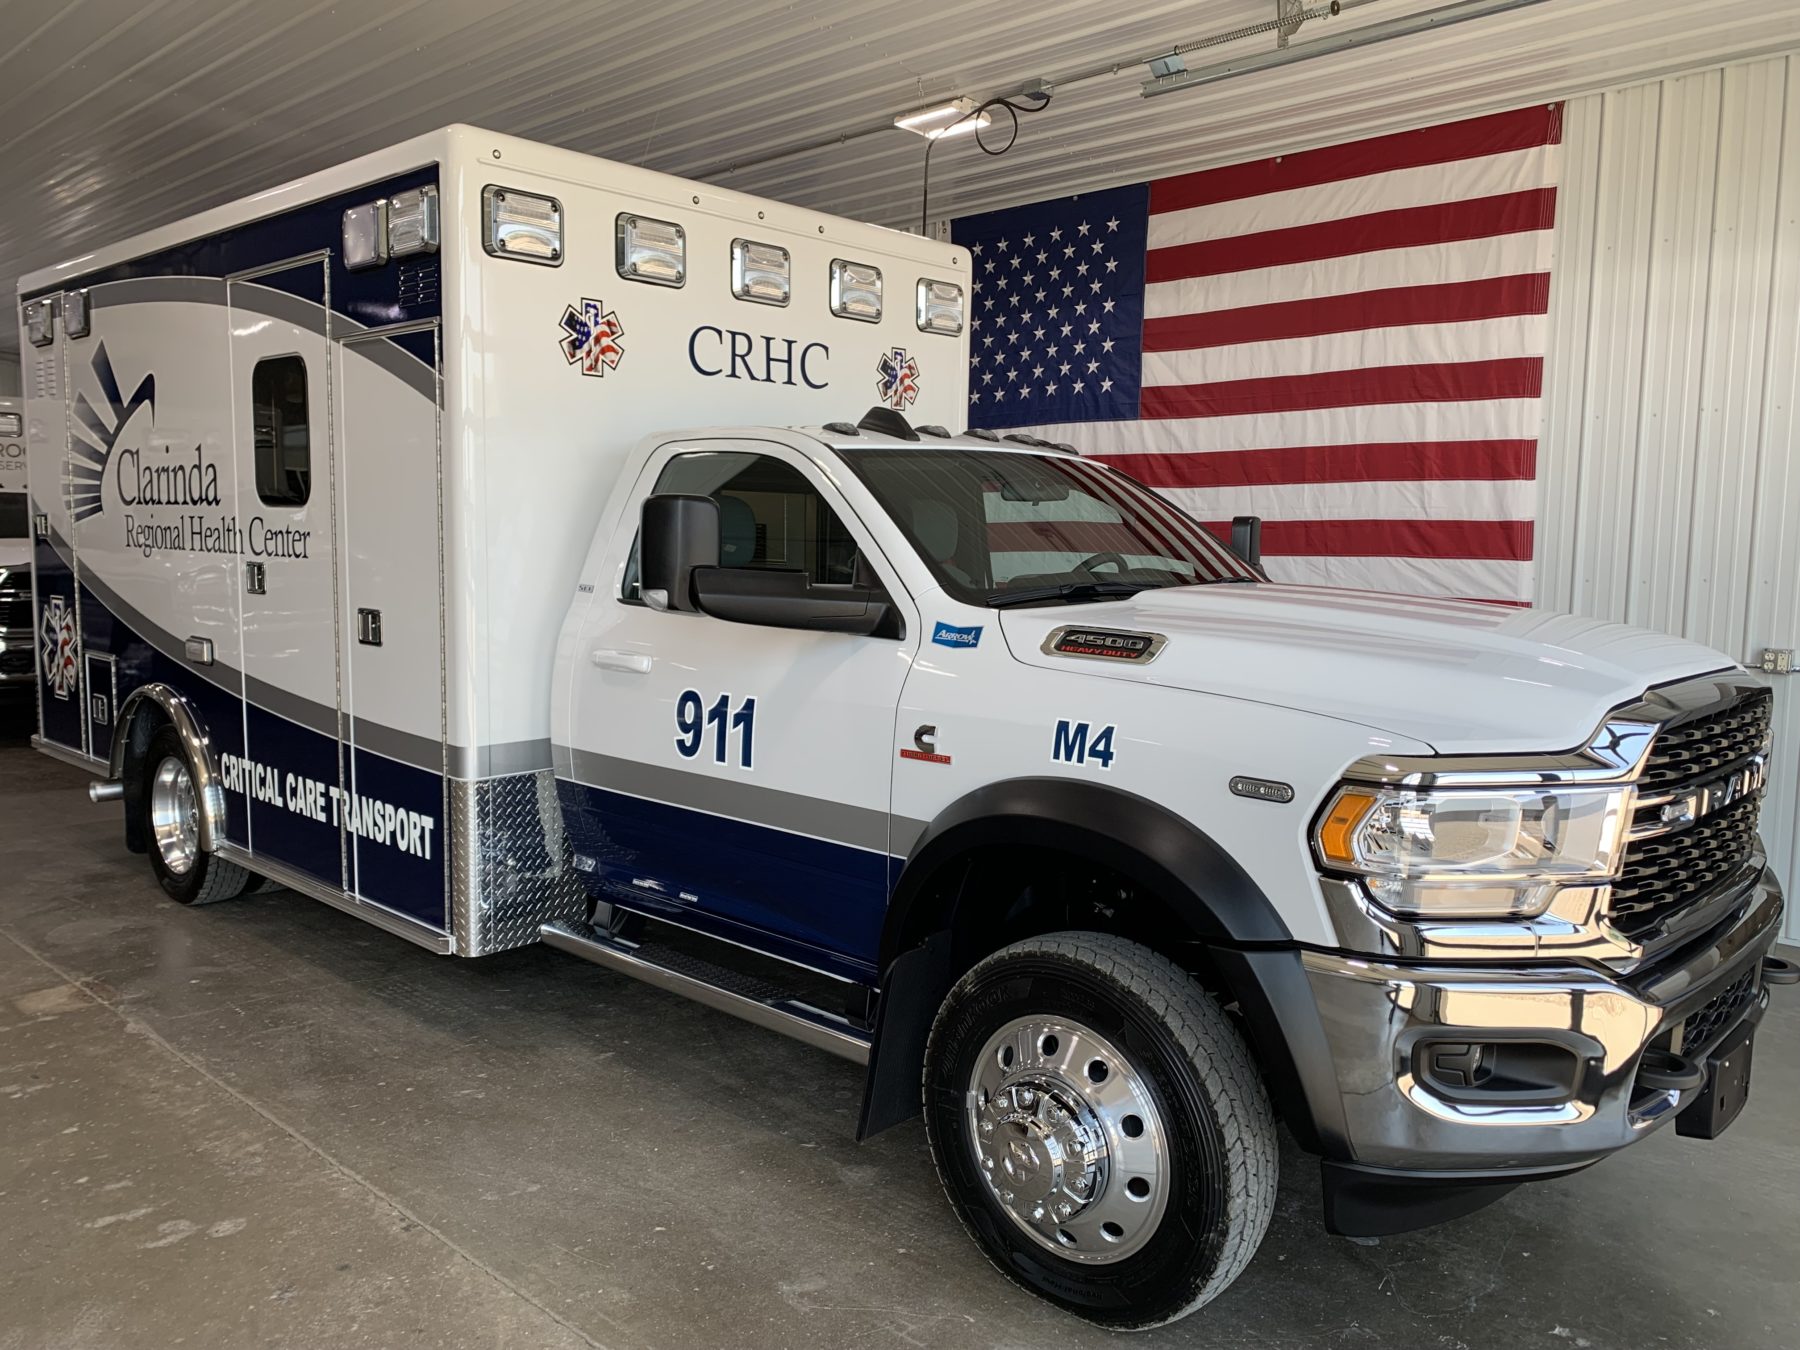 2022 Ram 4500 4x4 Heavy Duty Ambulance For Sale – Picture 1